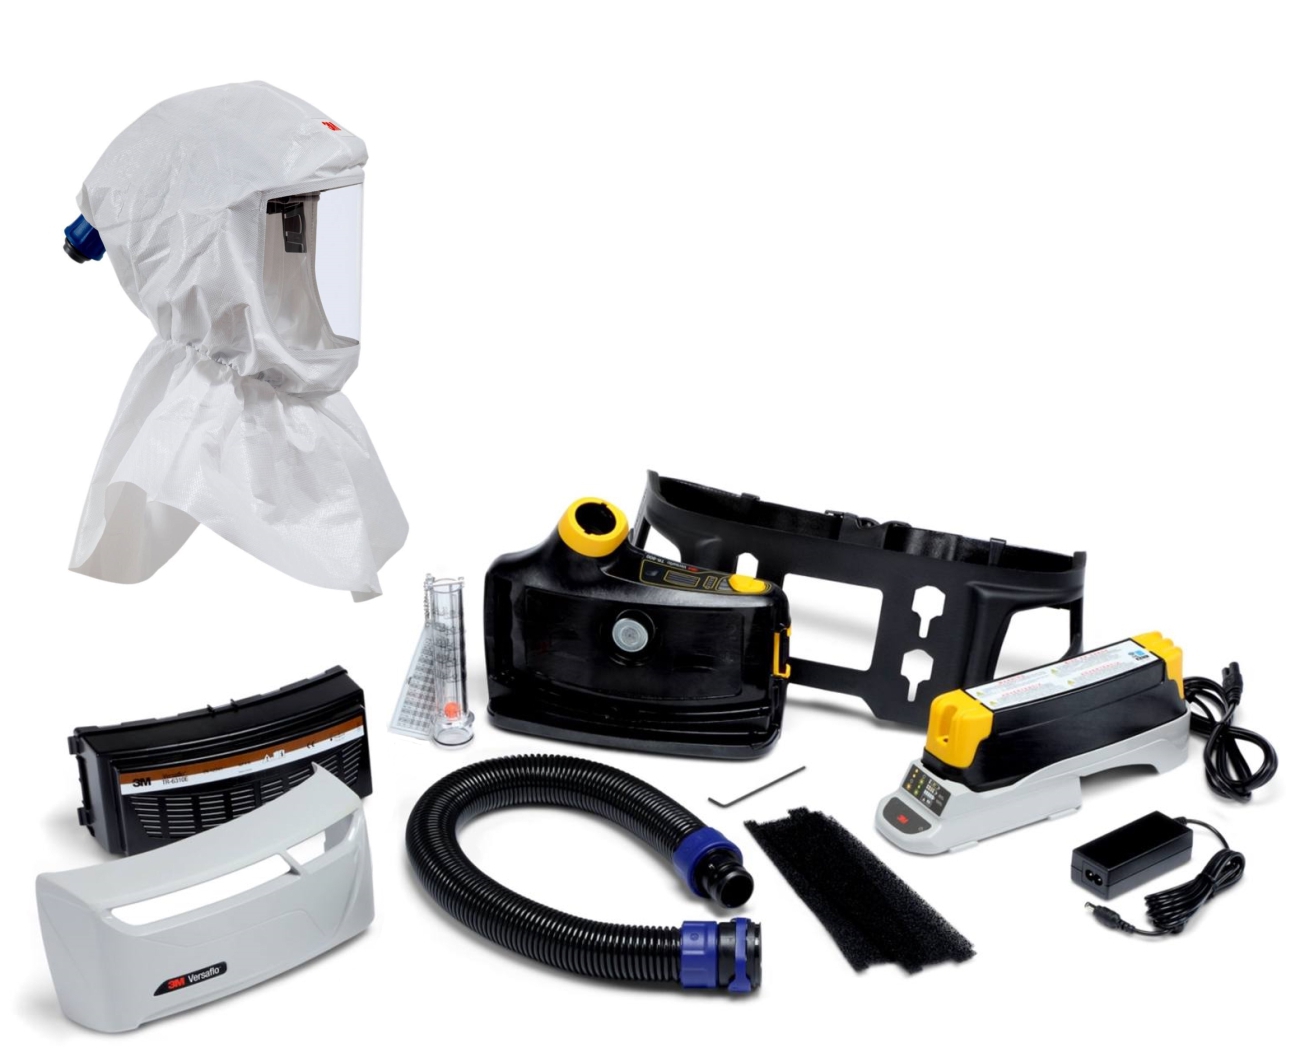 3M TR-819E IS Versaflo starter pack Ex protection incl. TR-802E, accessories and 3M Versaflo Premium lightweight bonnet S655 starter pack incl. head support and textile neck seal, material: Web 24 Material: Web 24